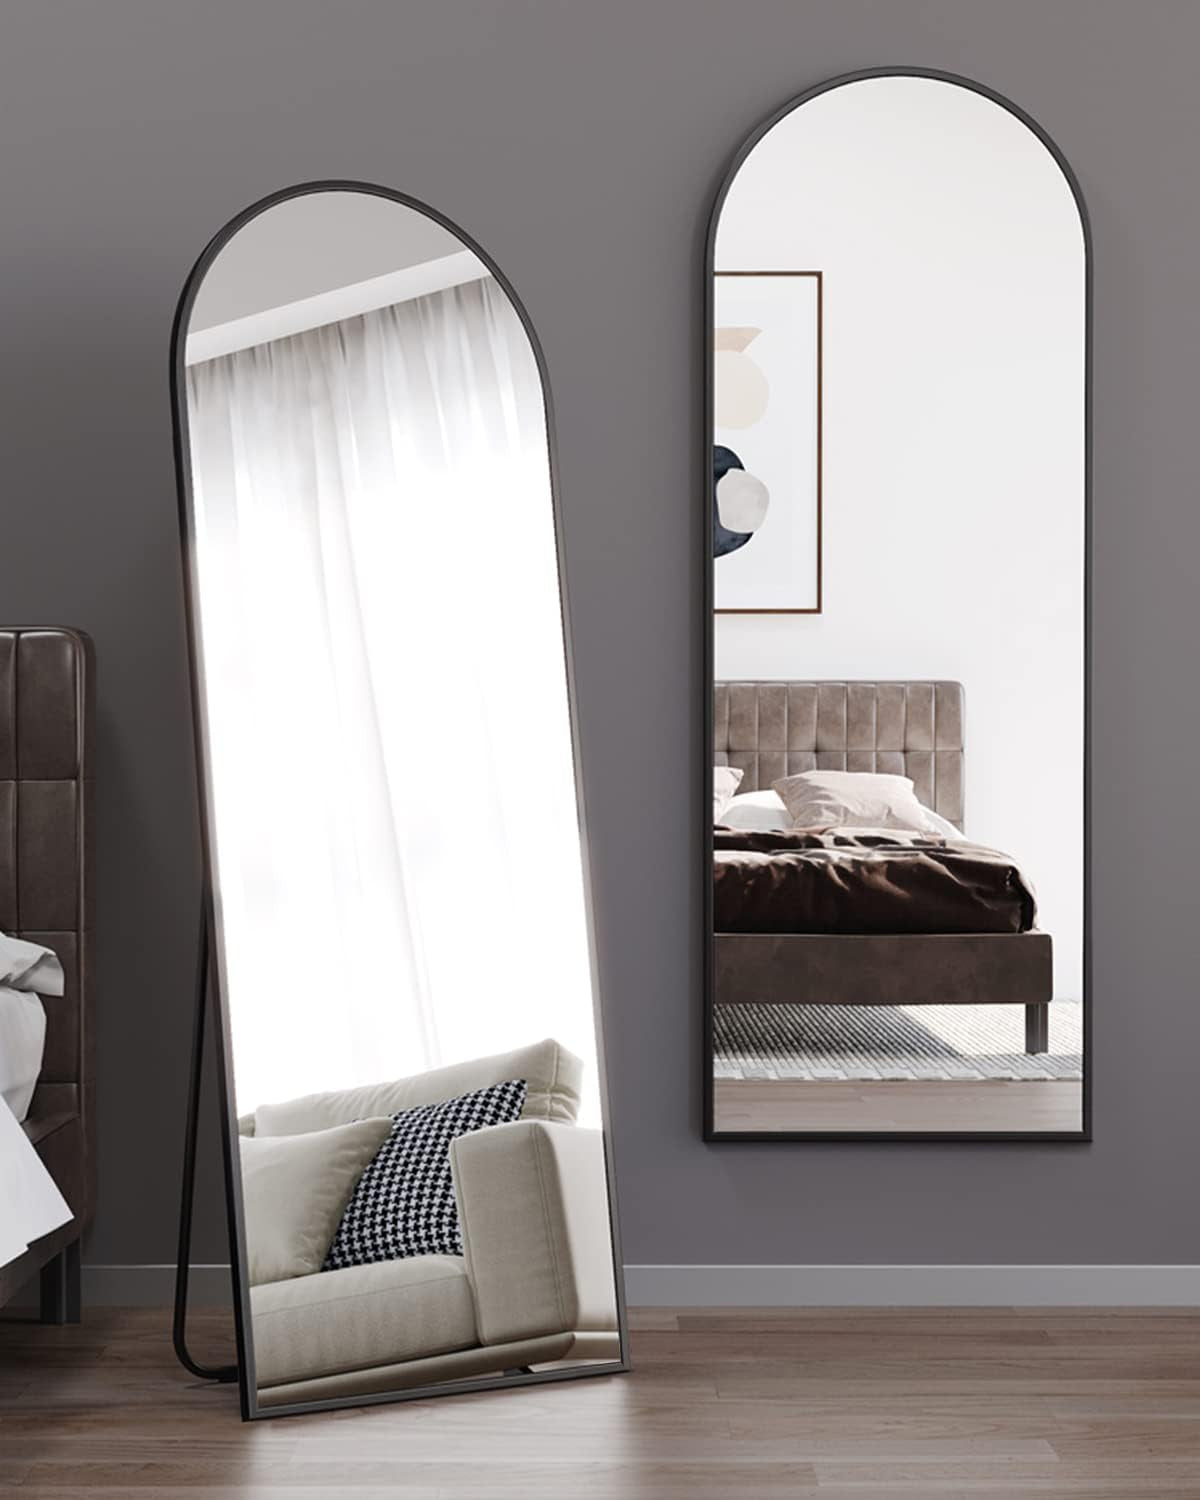 Floor Mirror, Full Length Mirror with Stand, Arched Wall Mirror, Mirror Full Length, Black Floor Mirror Freestanding, Wall Mounted Mirror for Bedroom Living Room, Black